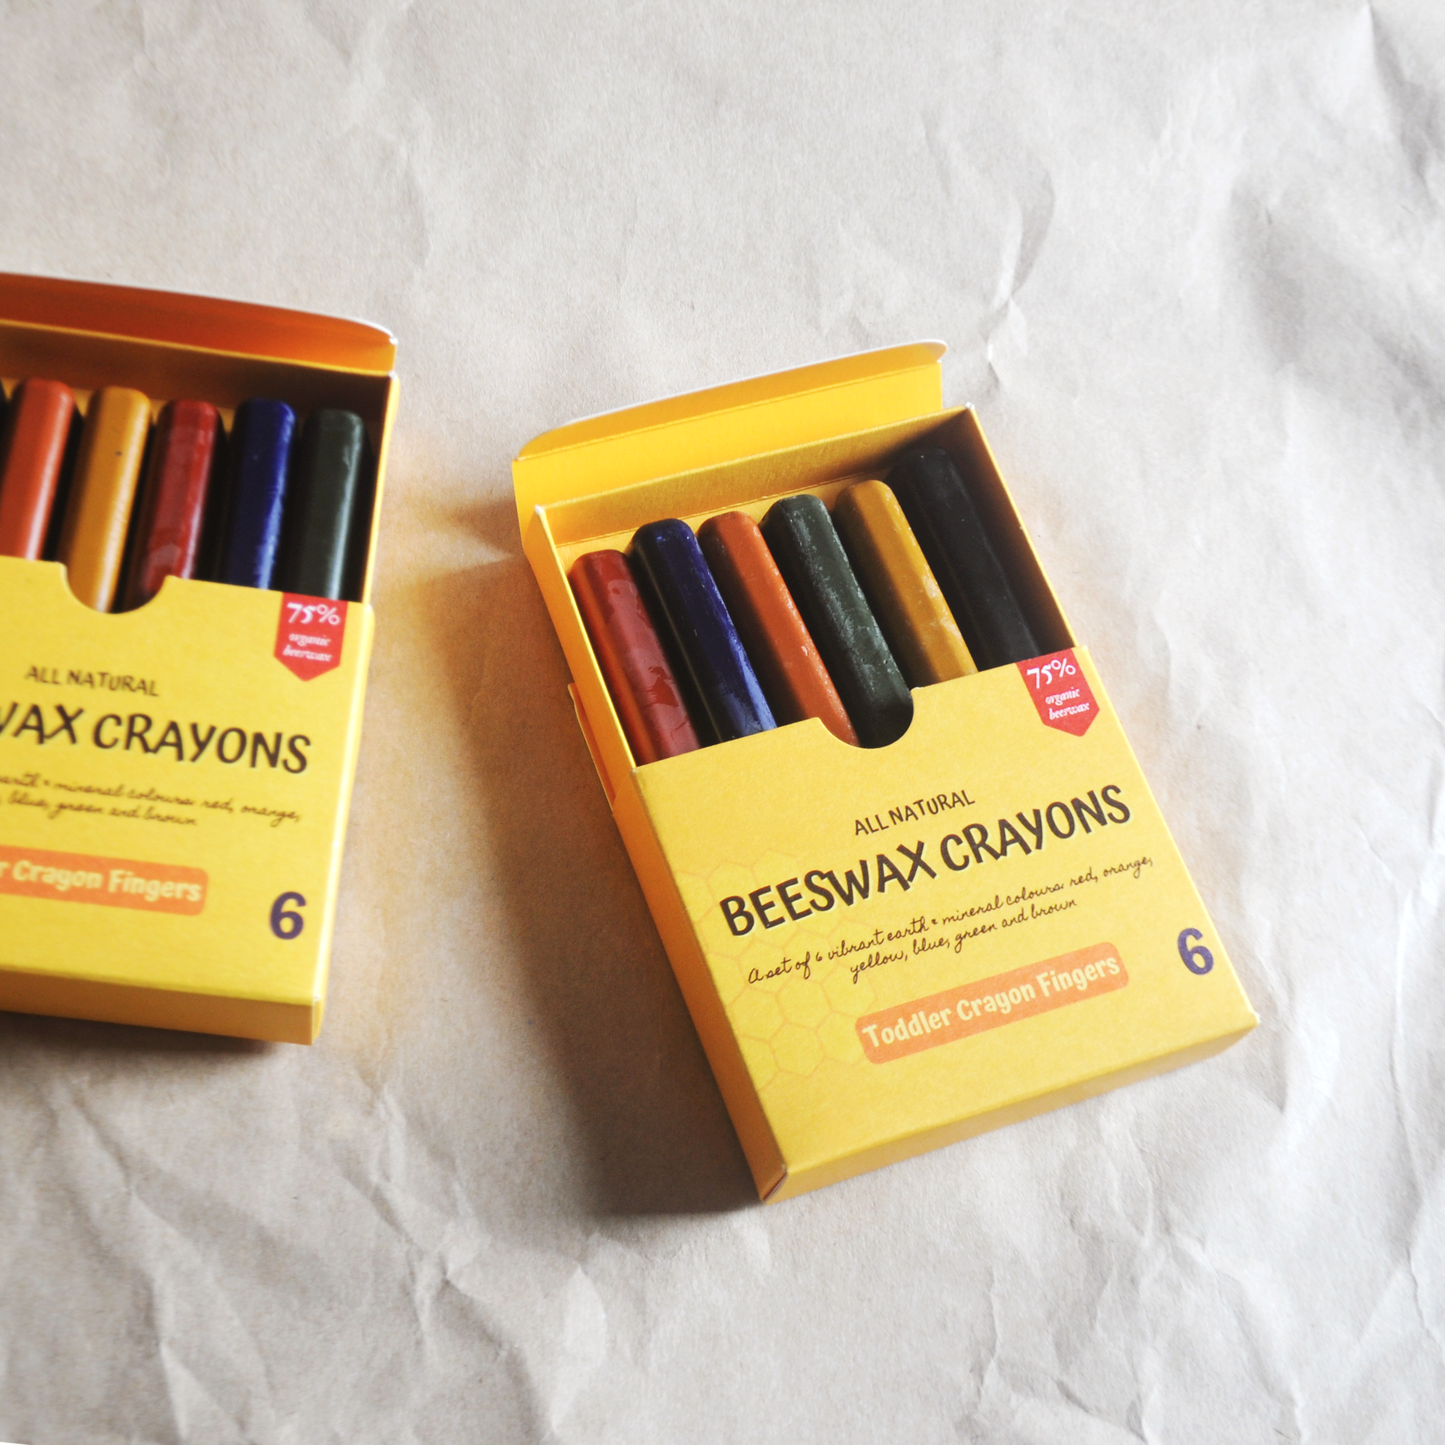 SETS OF BEESWAX CRAYONS FINGERS FOR TODDLERS IN THE  OPEN BOXES FLAT LAY WITH CRAYON BOXES IN BACKGROUND